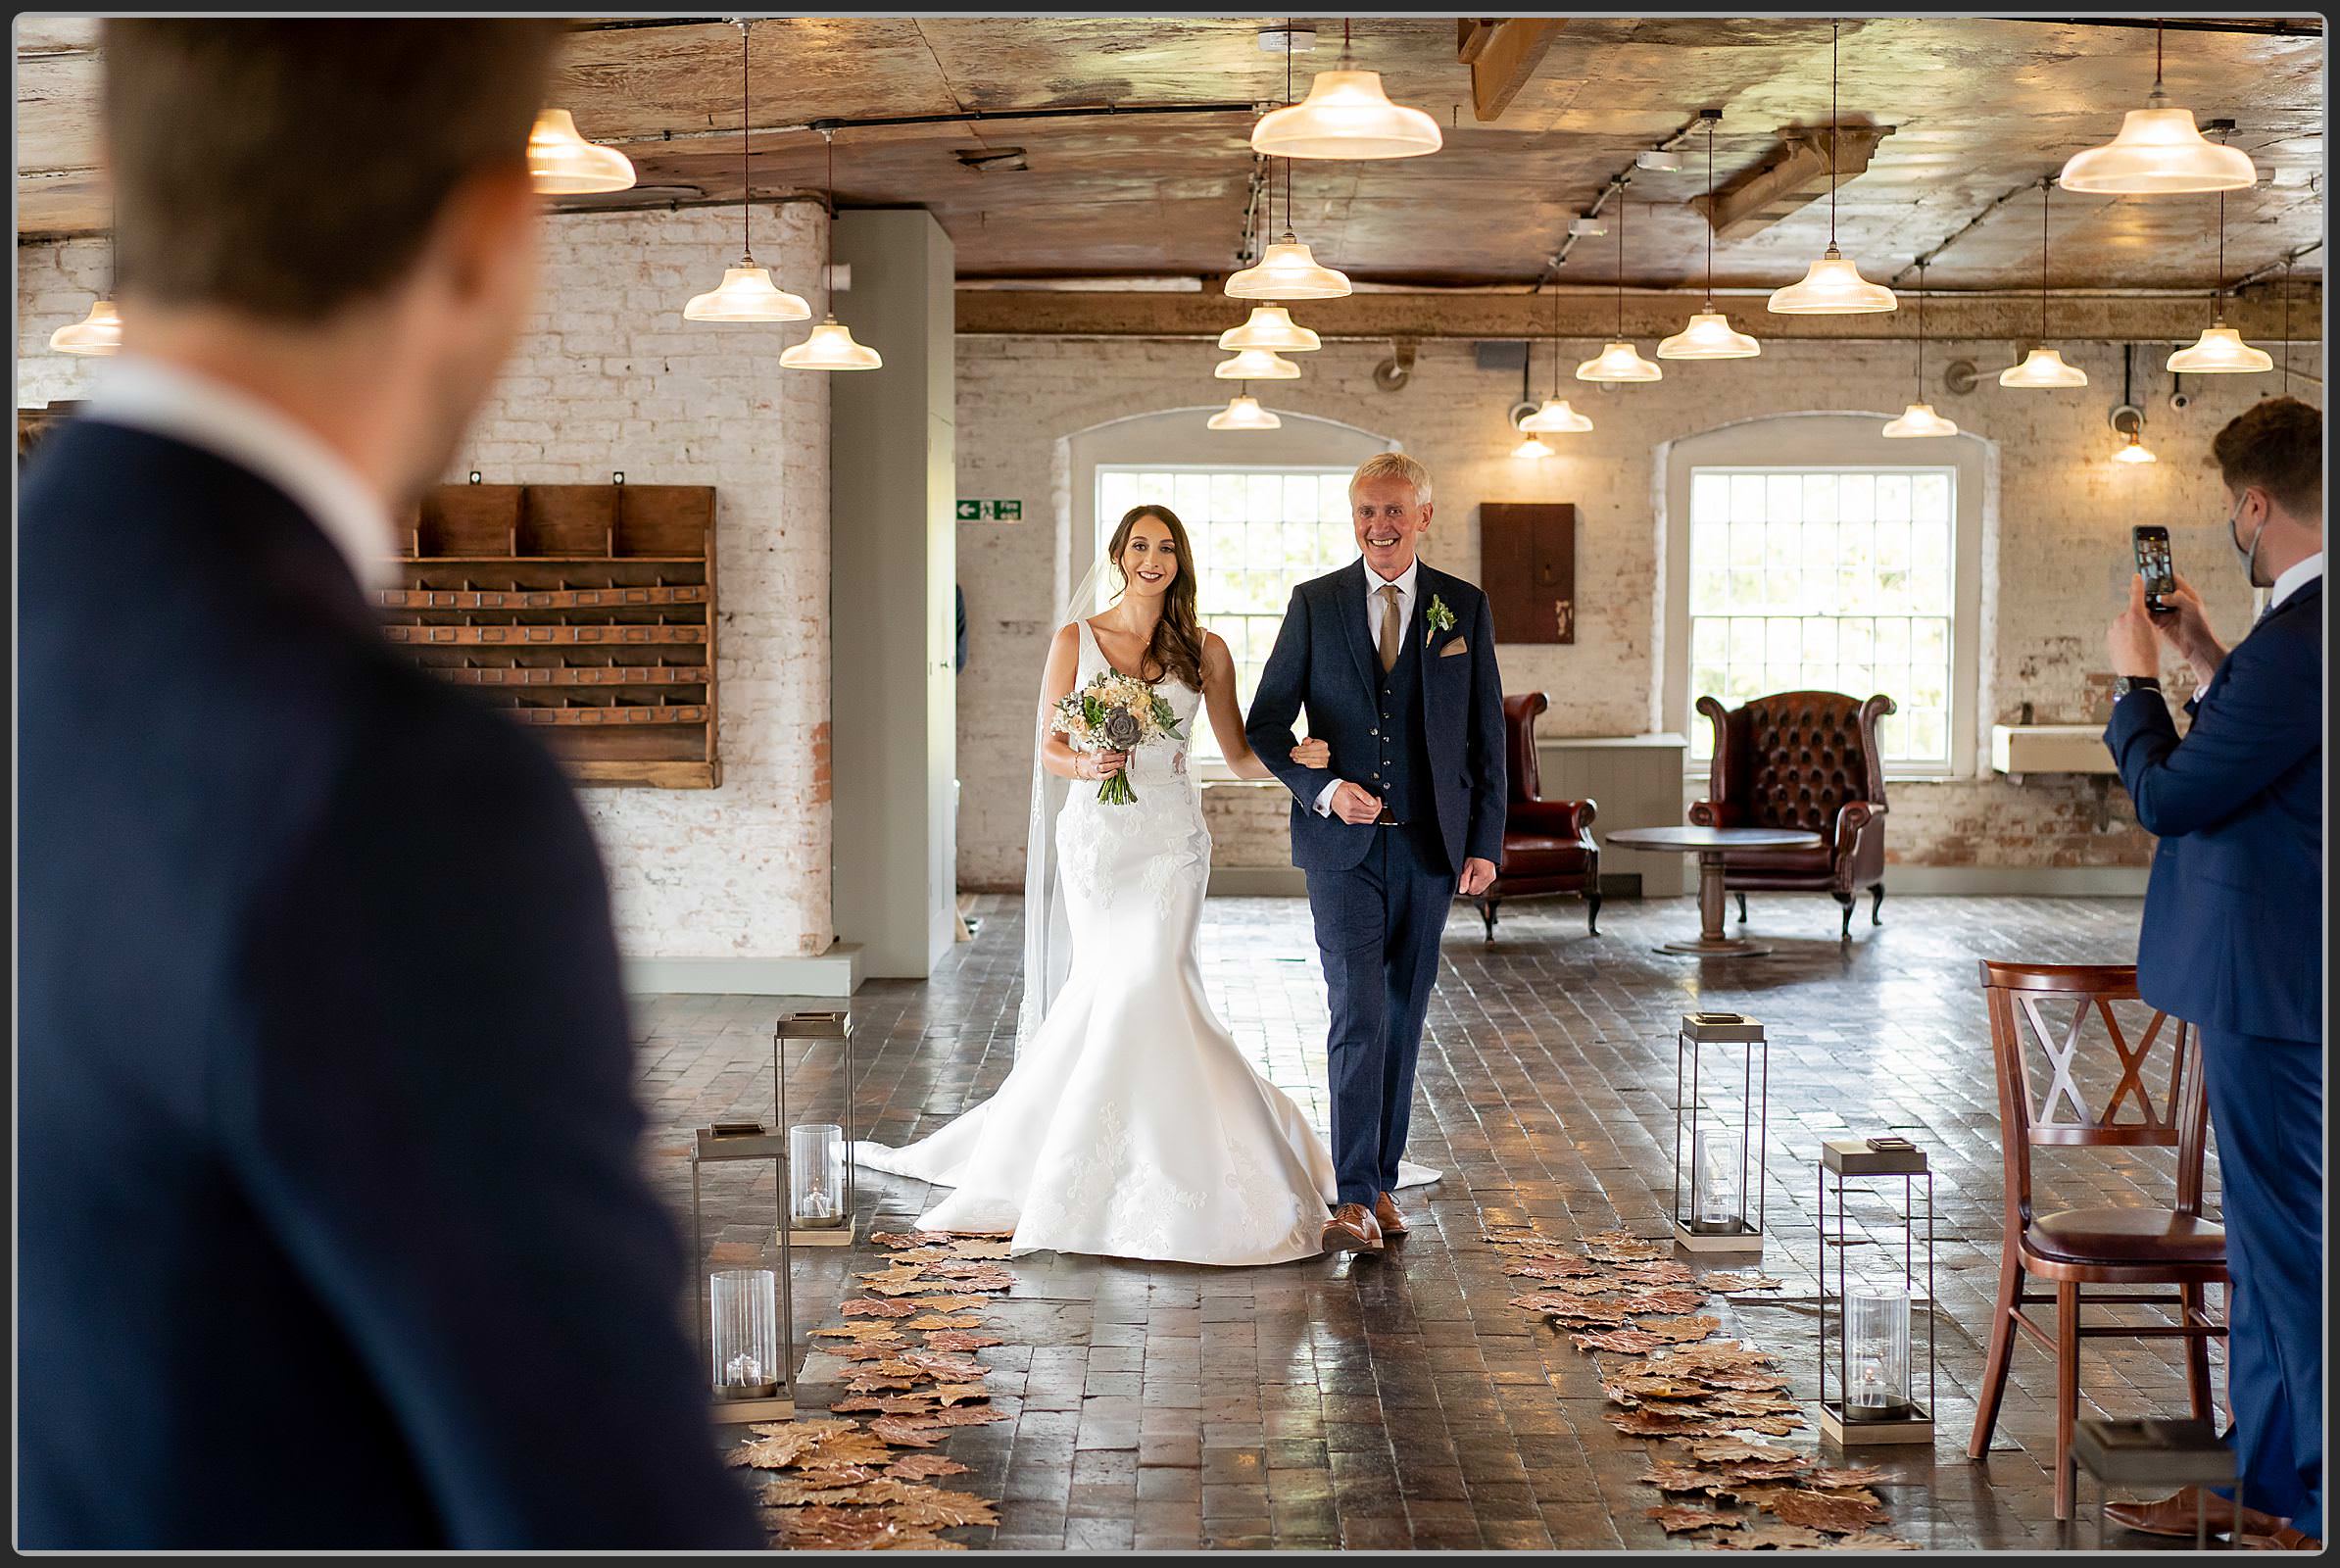 Father and daughter walking down the aisle